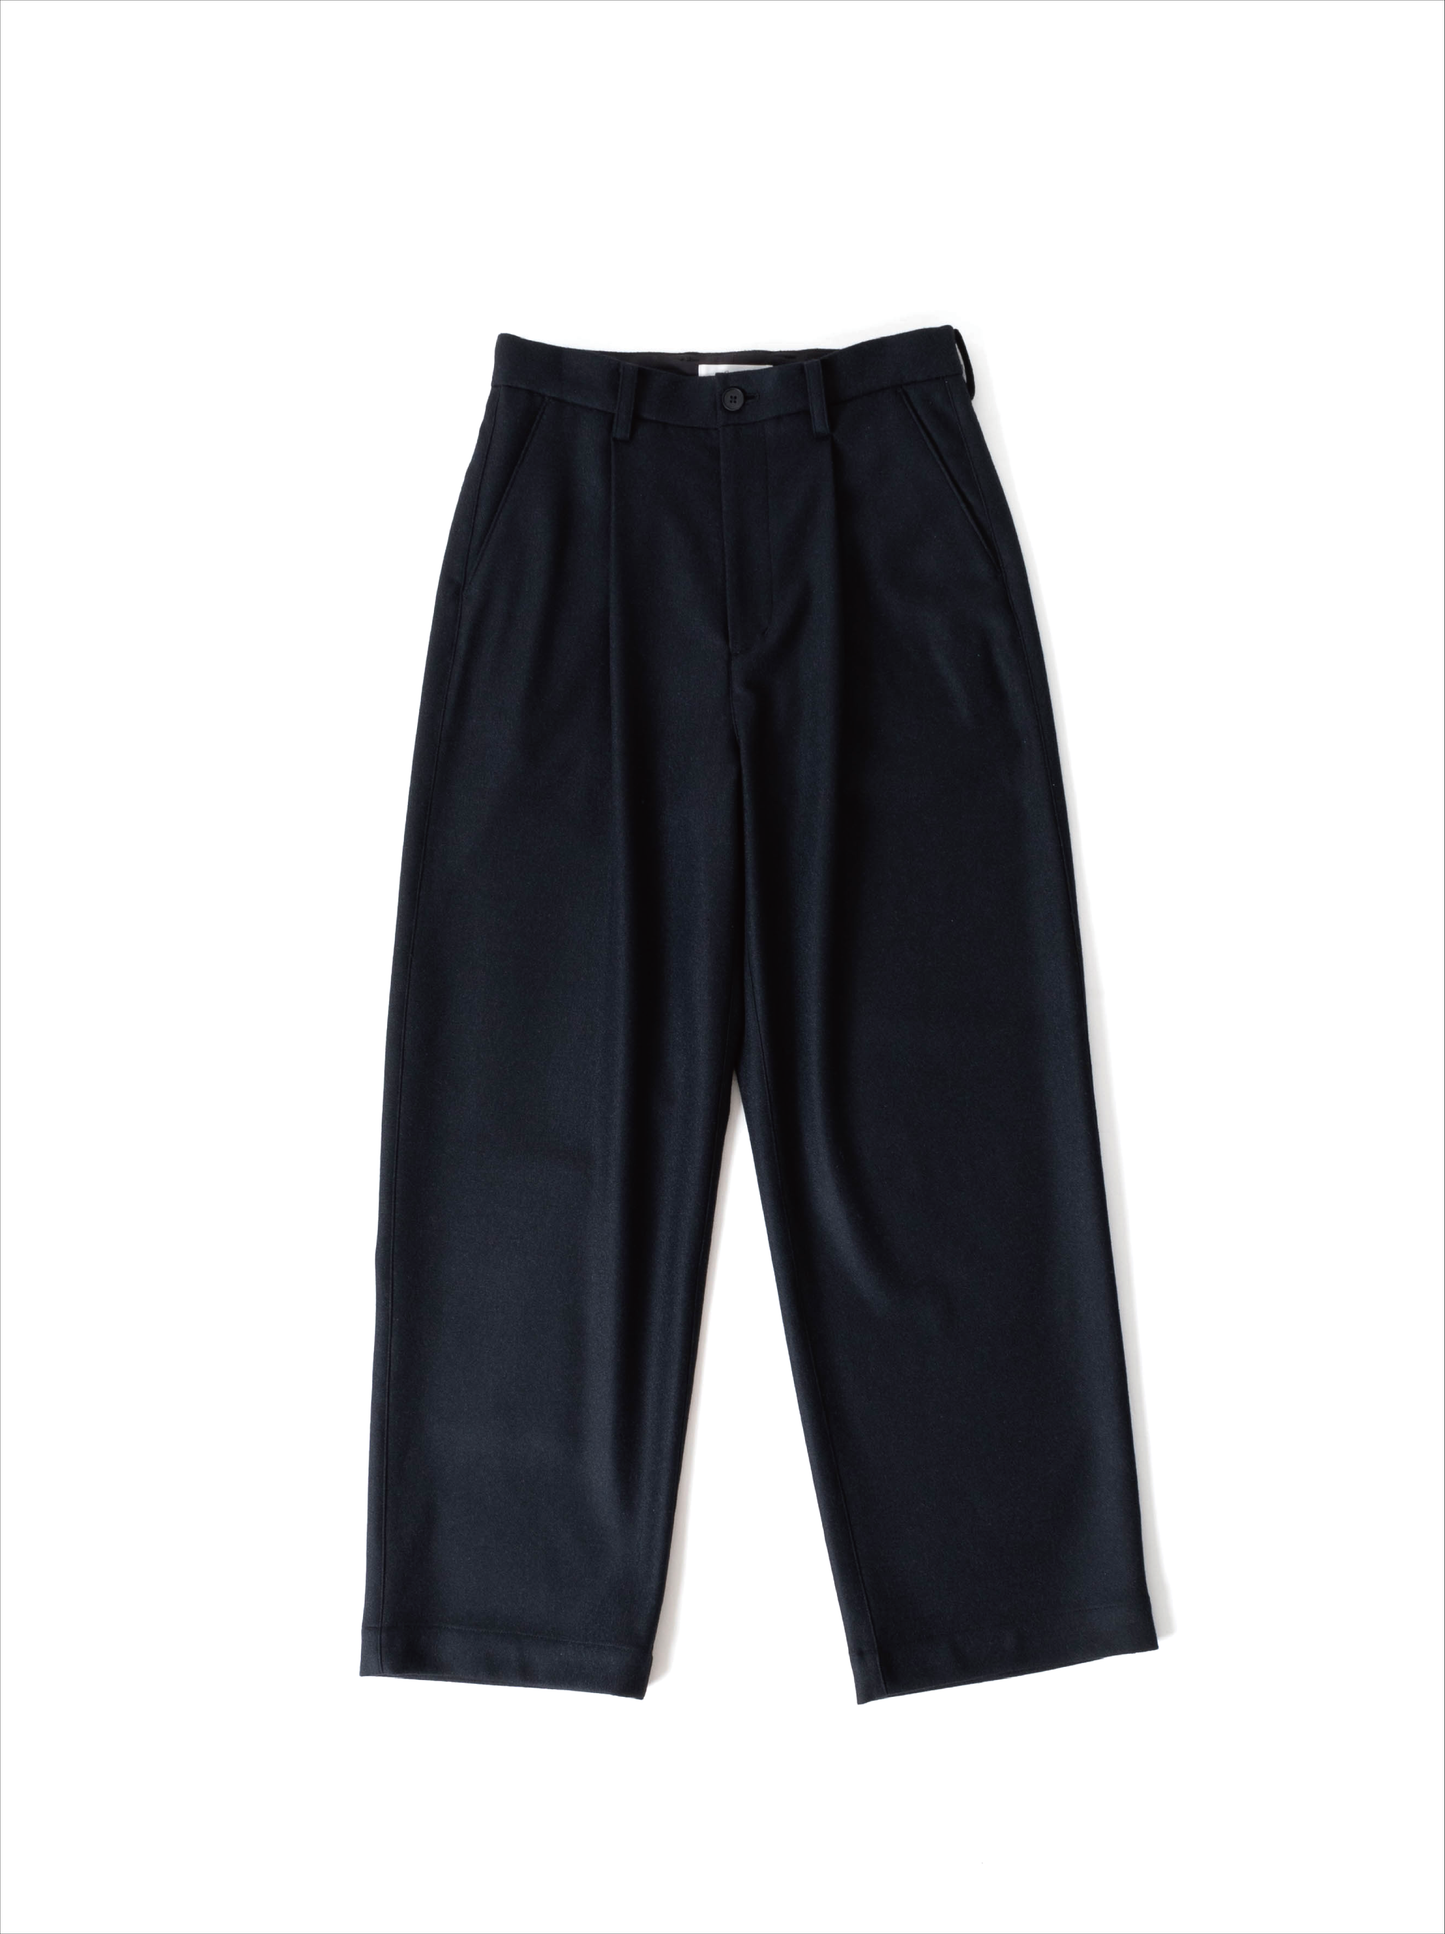 WOOL/CASHMERE COLLEGE FLANNEL WIDE PANTS｜BLACK